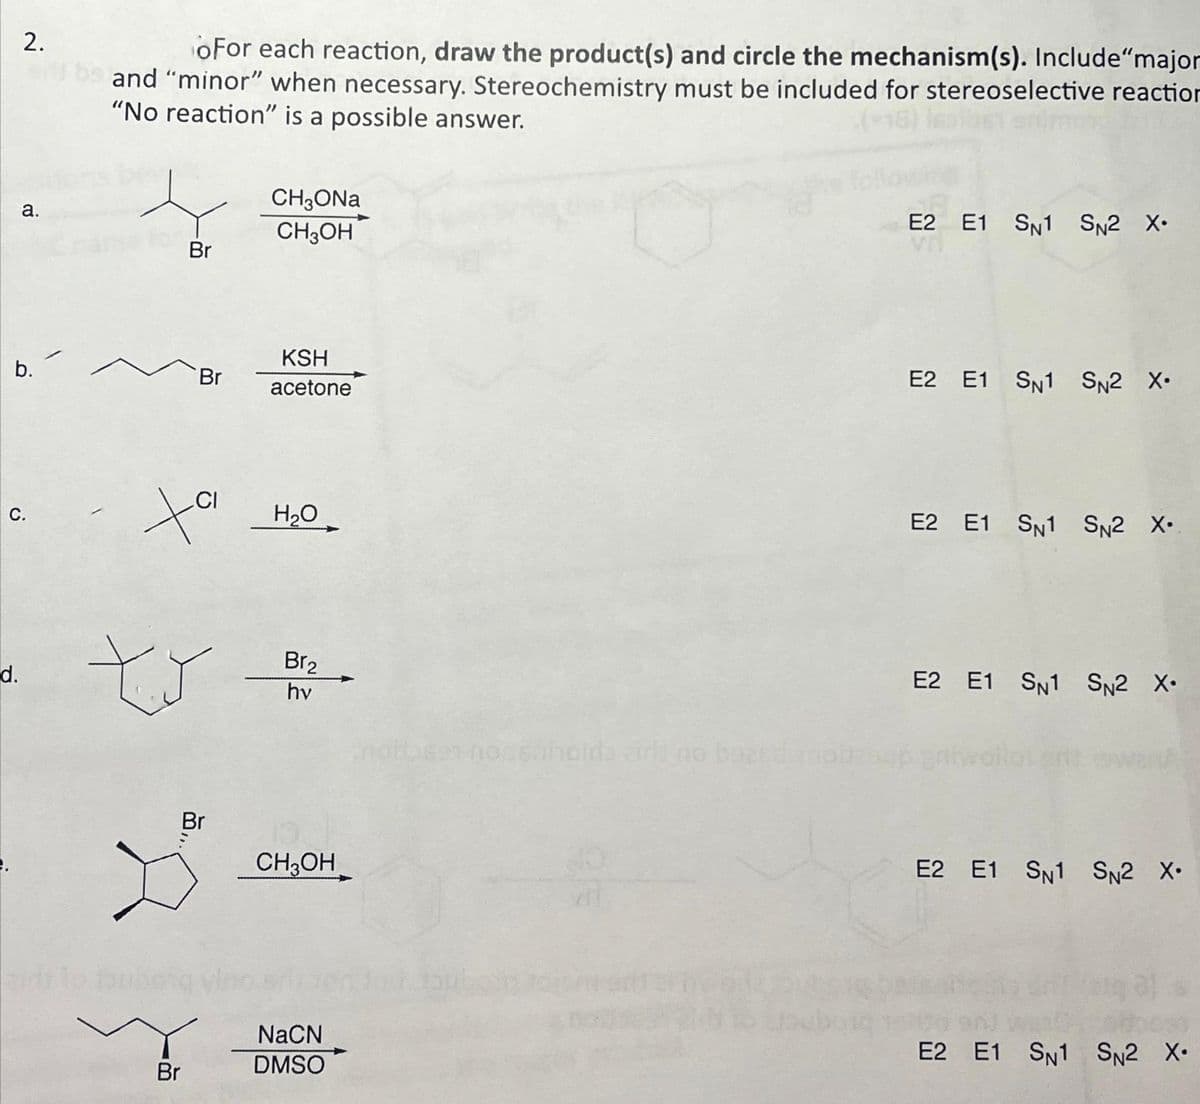 2.
a.
b.
d.
C.
oFor each reaction, draw the product(s) and circle the mechanism(s). Include "major
be and “minor" when necessary. Stereochemistry must be included for stereoselective reaction
"No reaction" is a possible answer.
Br
Br
ts
Br
CI
ta
ха но
Br
CH3ONa
CH₂OH
KSH
acetone
Br₂
hv
CH3OH
NaCN
DMSO
ser nongaholds zid) no baard
E2 E1 SN1 SN2 X.
E2 E1 SN1 SN2 X.
E2 E1 SN1 SN2 X.
E2 E1 SN1 SN2 X•
E2 E1 SN1 SN2 X•
E2 E1 SN1 SN2 X.